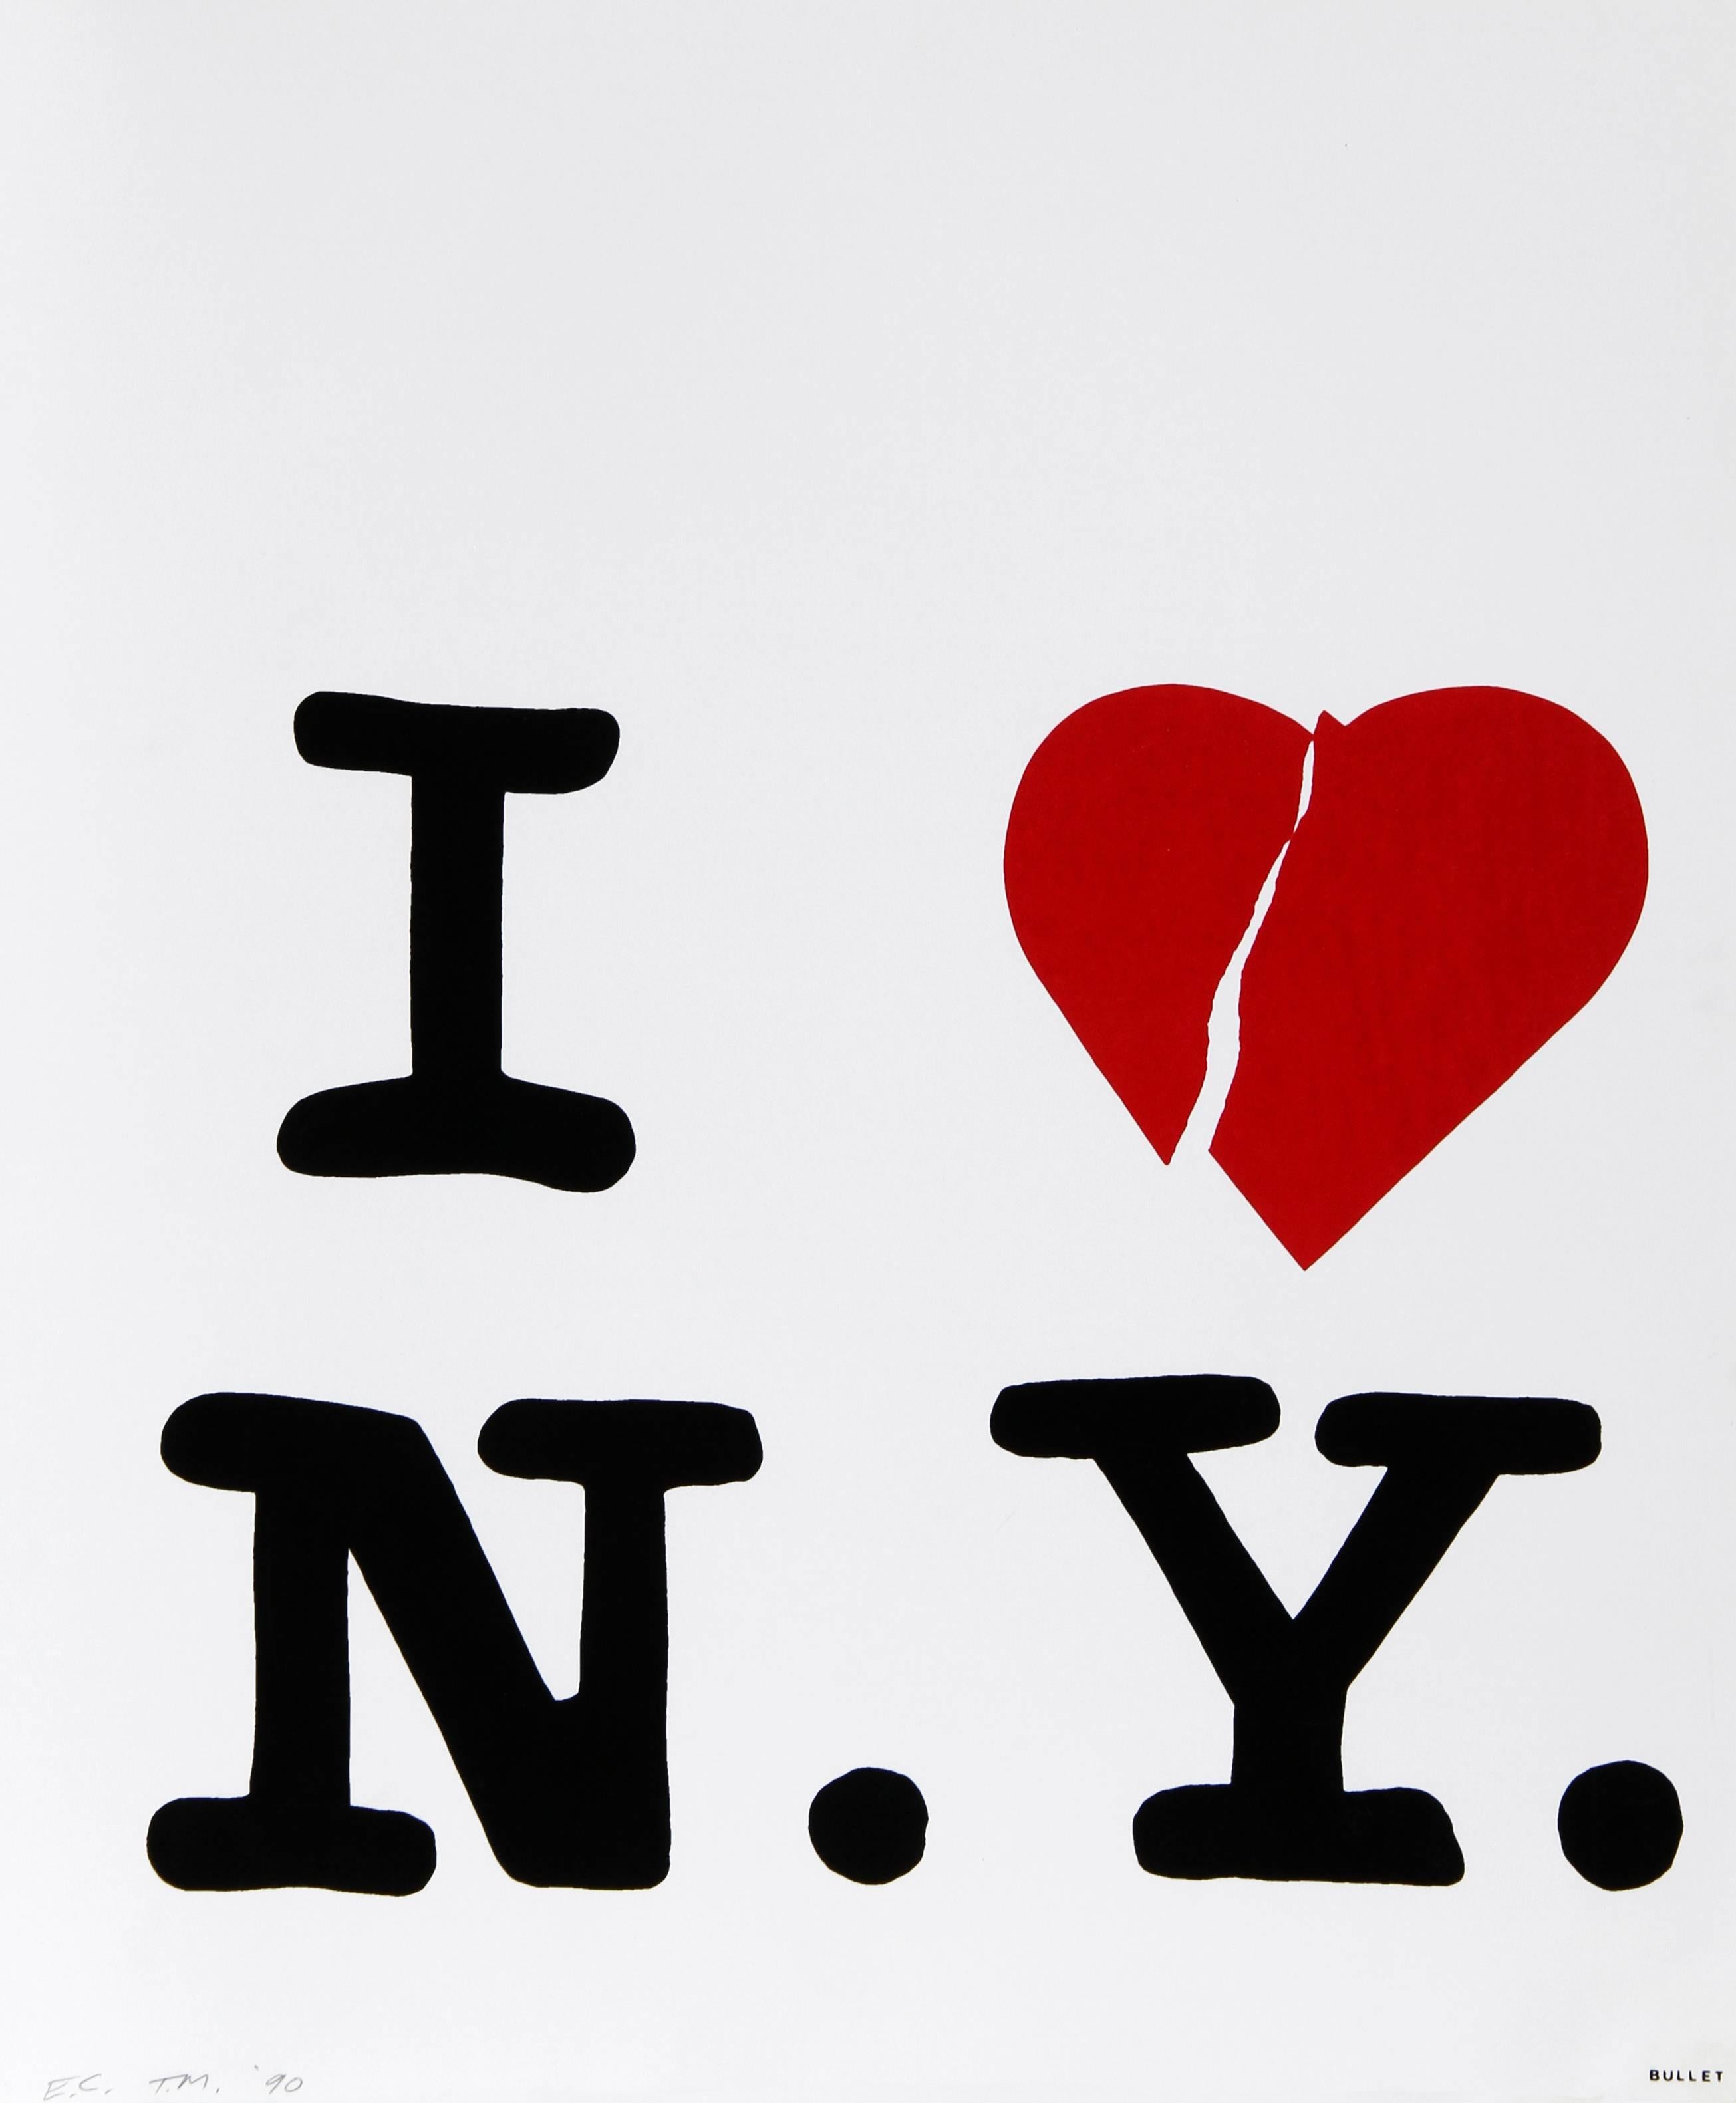 Tom McGlynn Abstract Print - I Love NY from Bullet Space, Your House is Mine